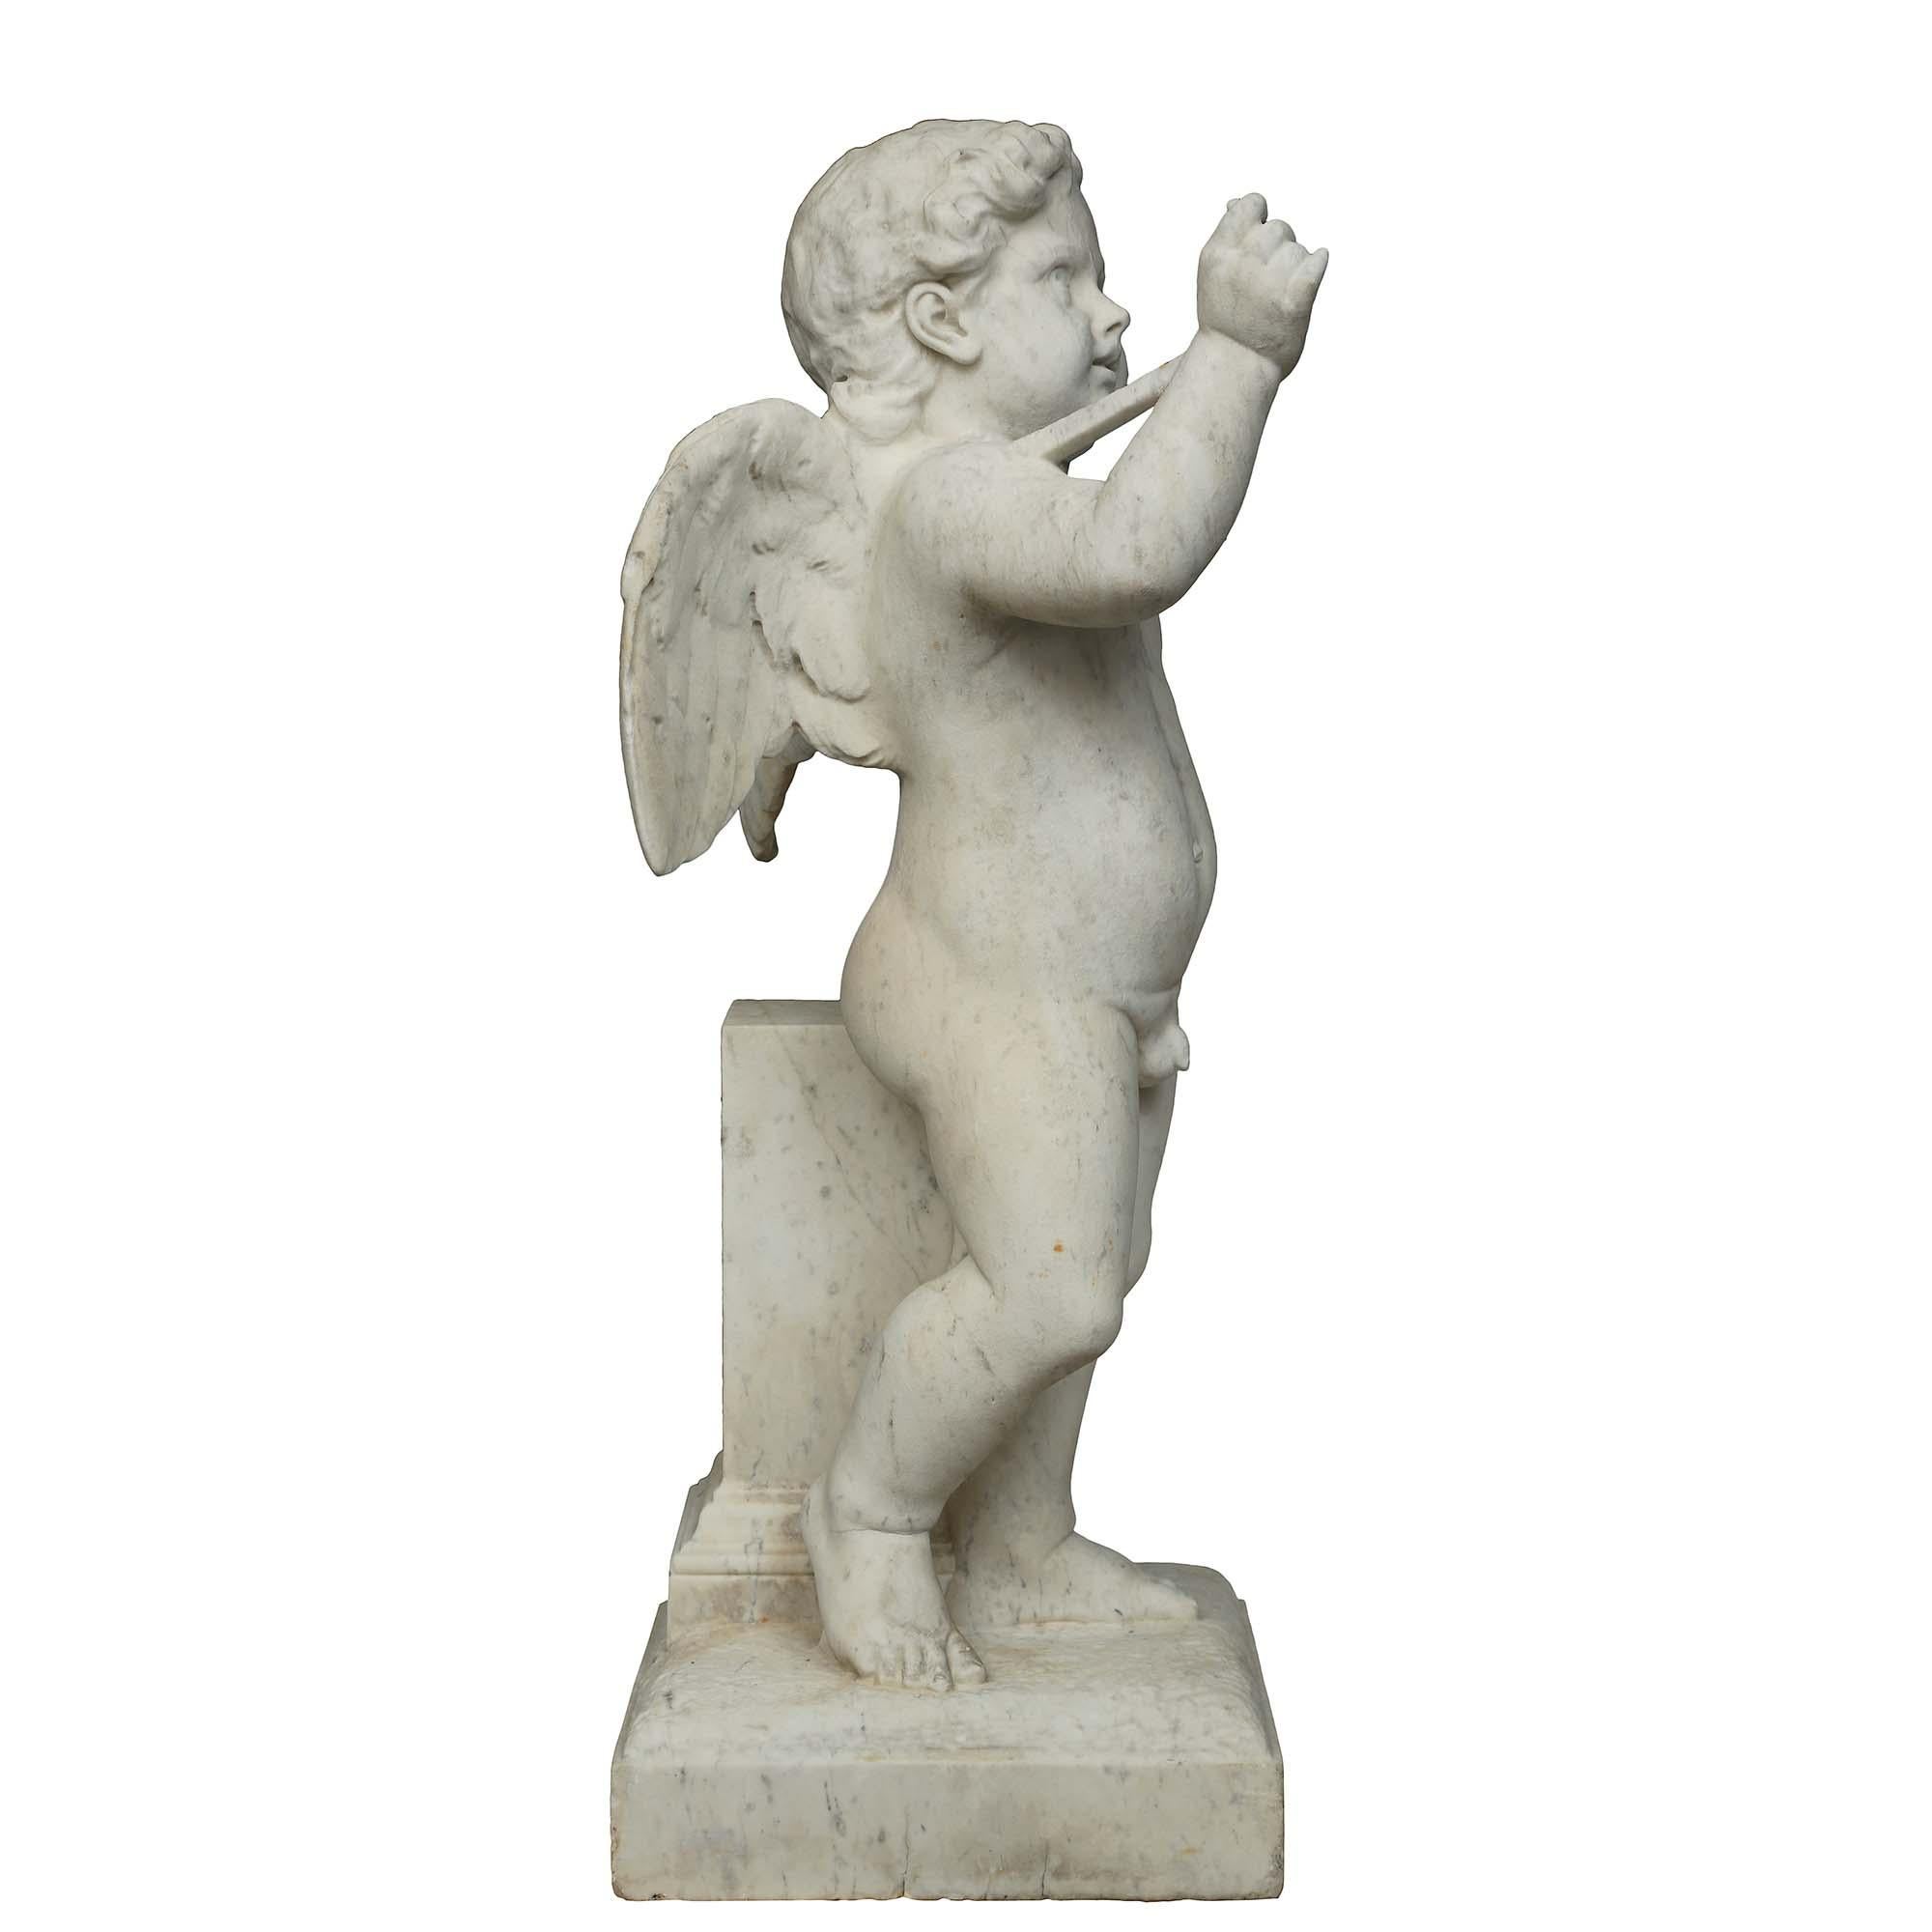 A charming Italian 19th century white Carrara marble cherub fountain. The fountain is raised by a square base with terrain-like design below the cherub leaning on an architectural element. The nude winged cherub has one hand in the air and an